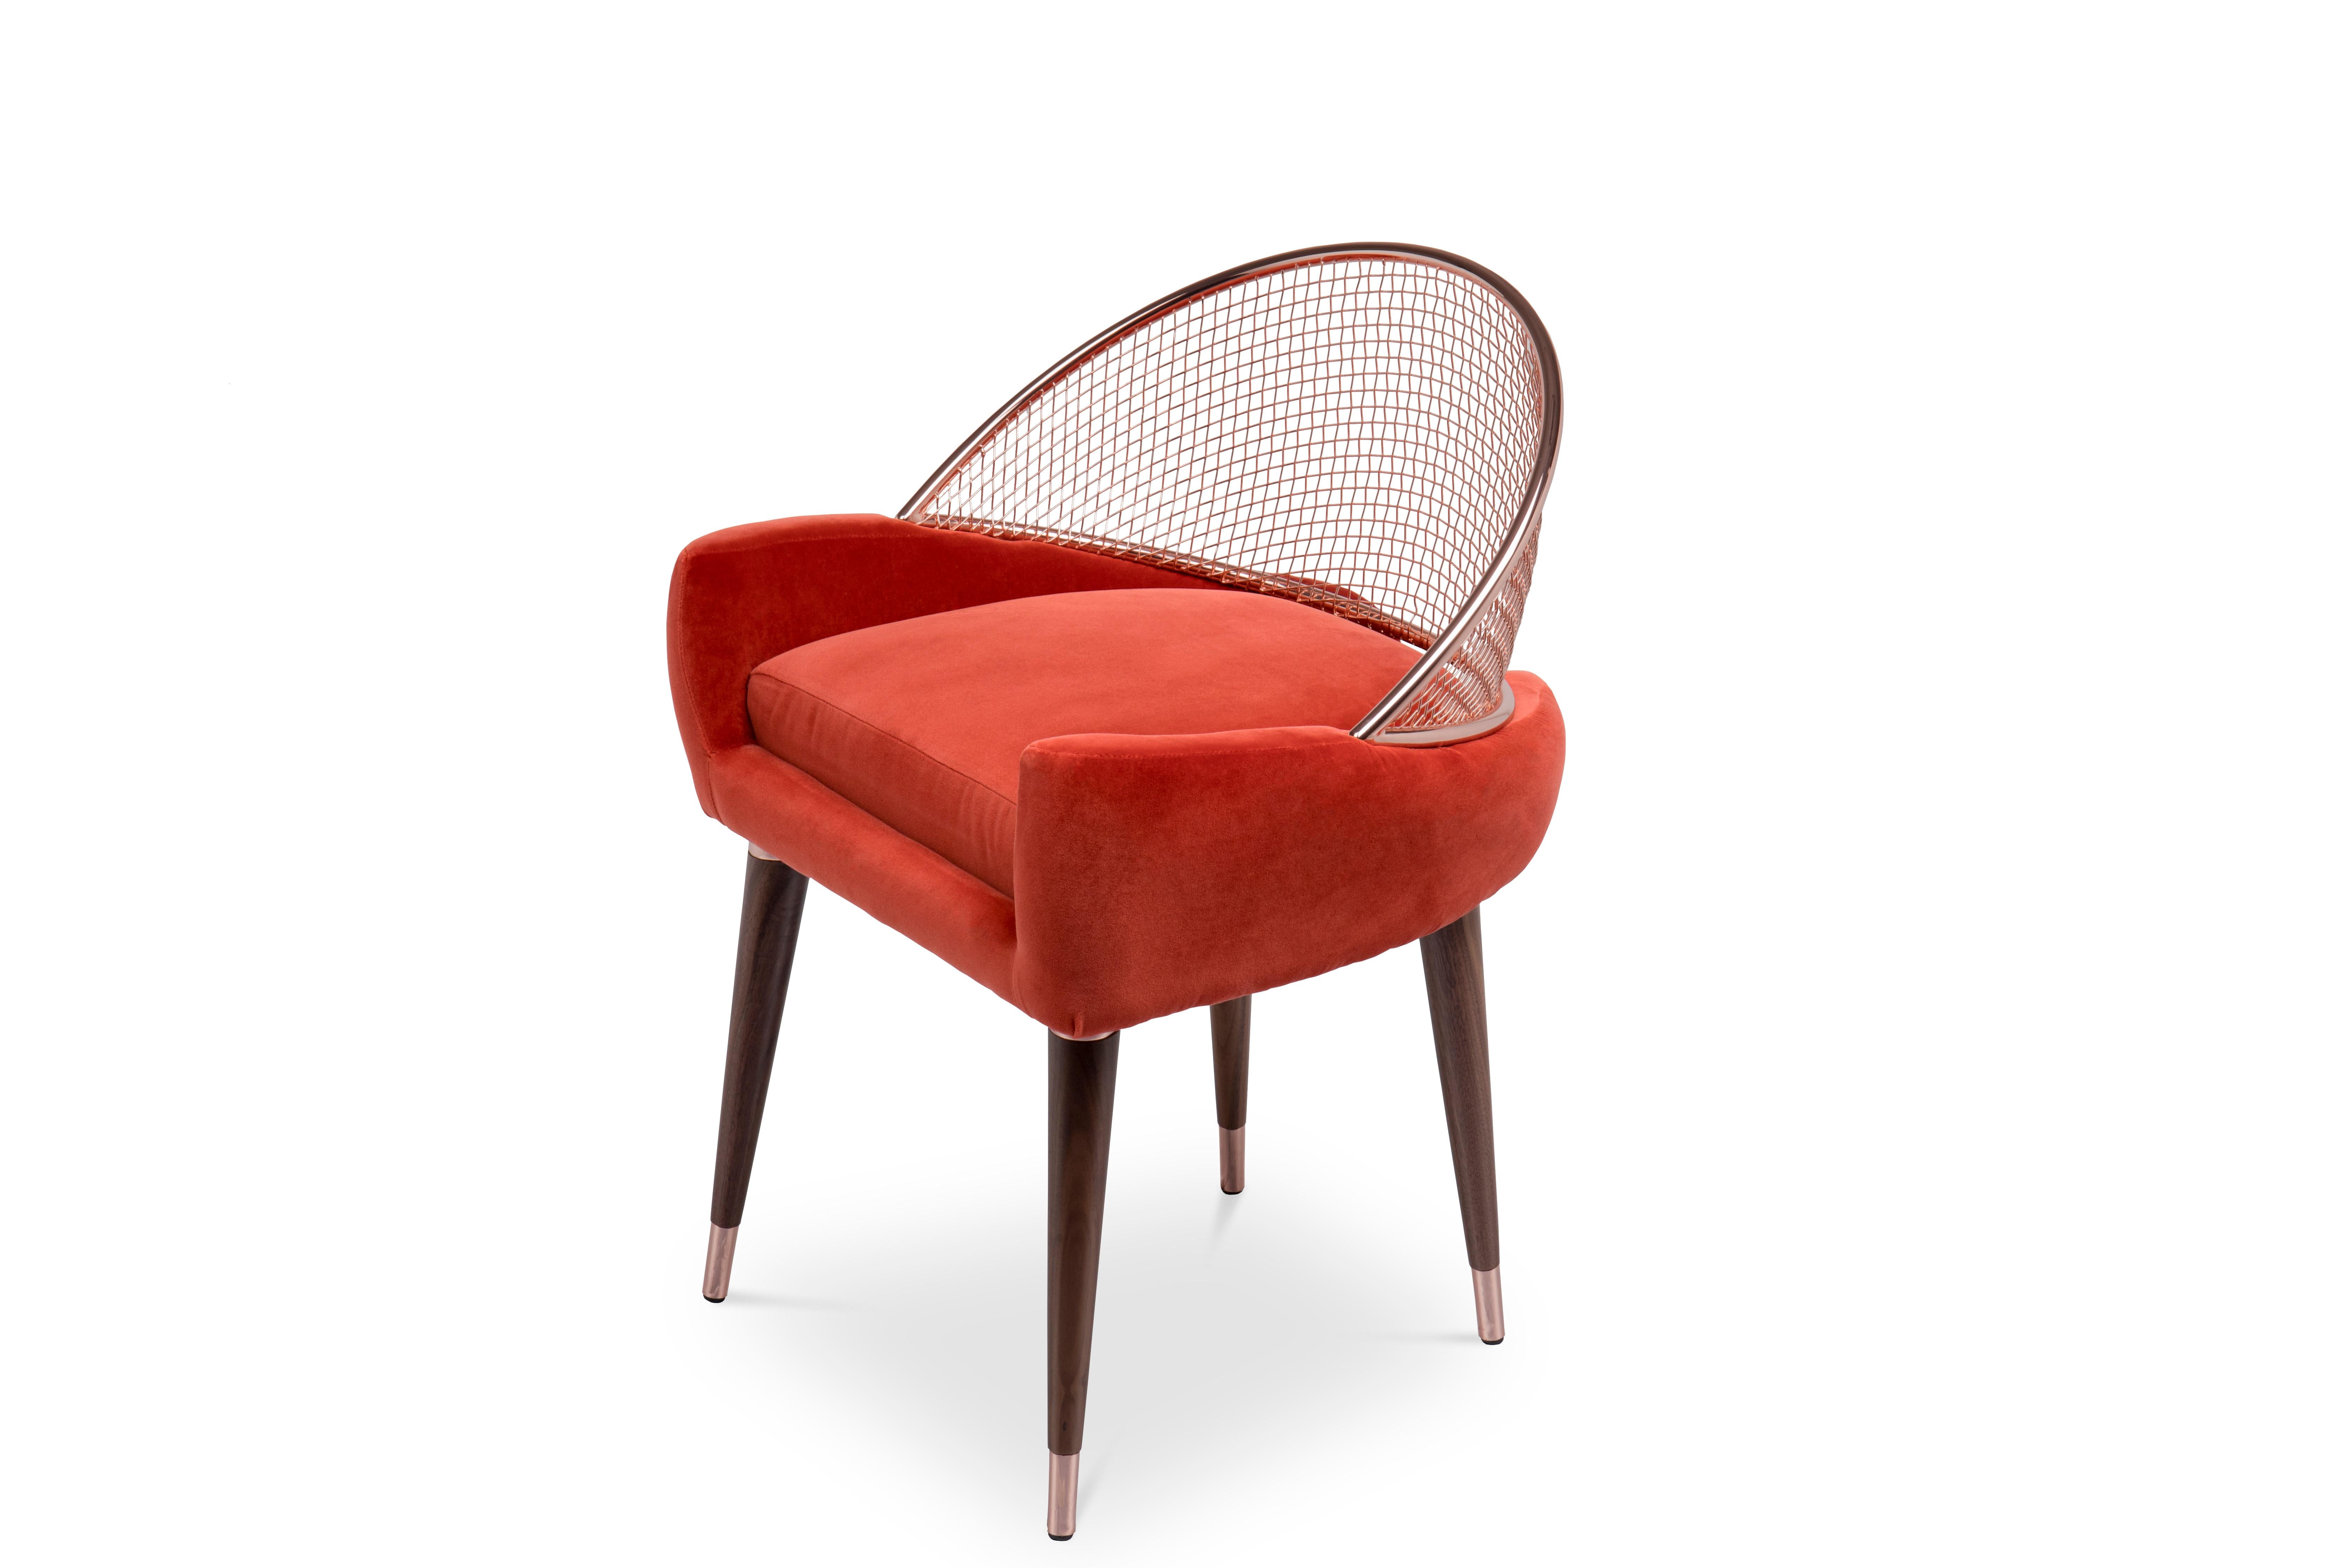 Mid-Century Modern Garbo Dining Chair in Red Velvet by Essential Home

Mid-Century Modern Garbo Dining Chair in Red Velvet features a velvet upholstered seat with a removable cushion, completed by a crescent low back that is handmade in brass,